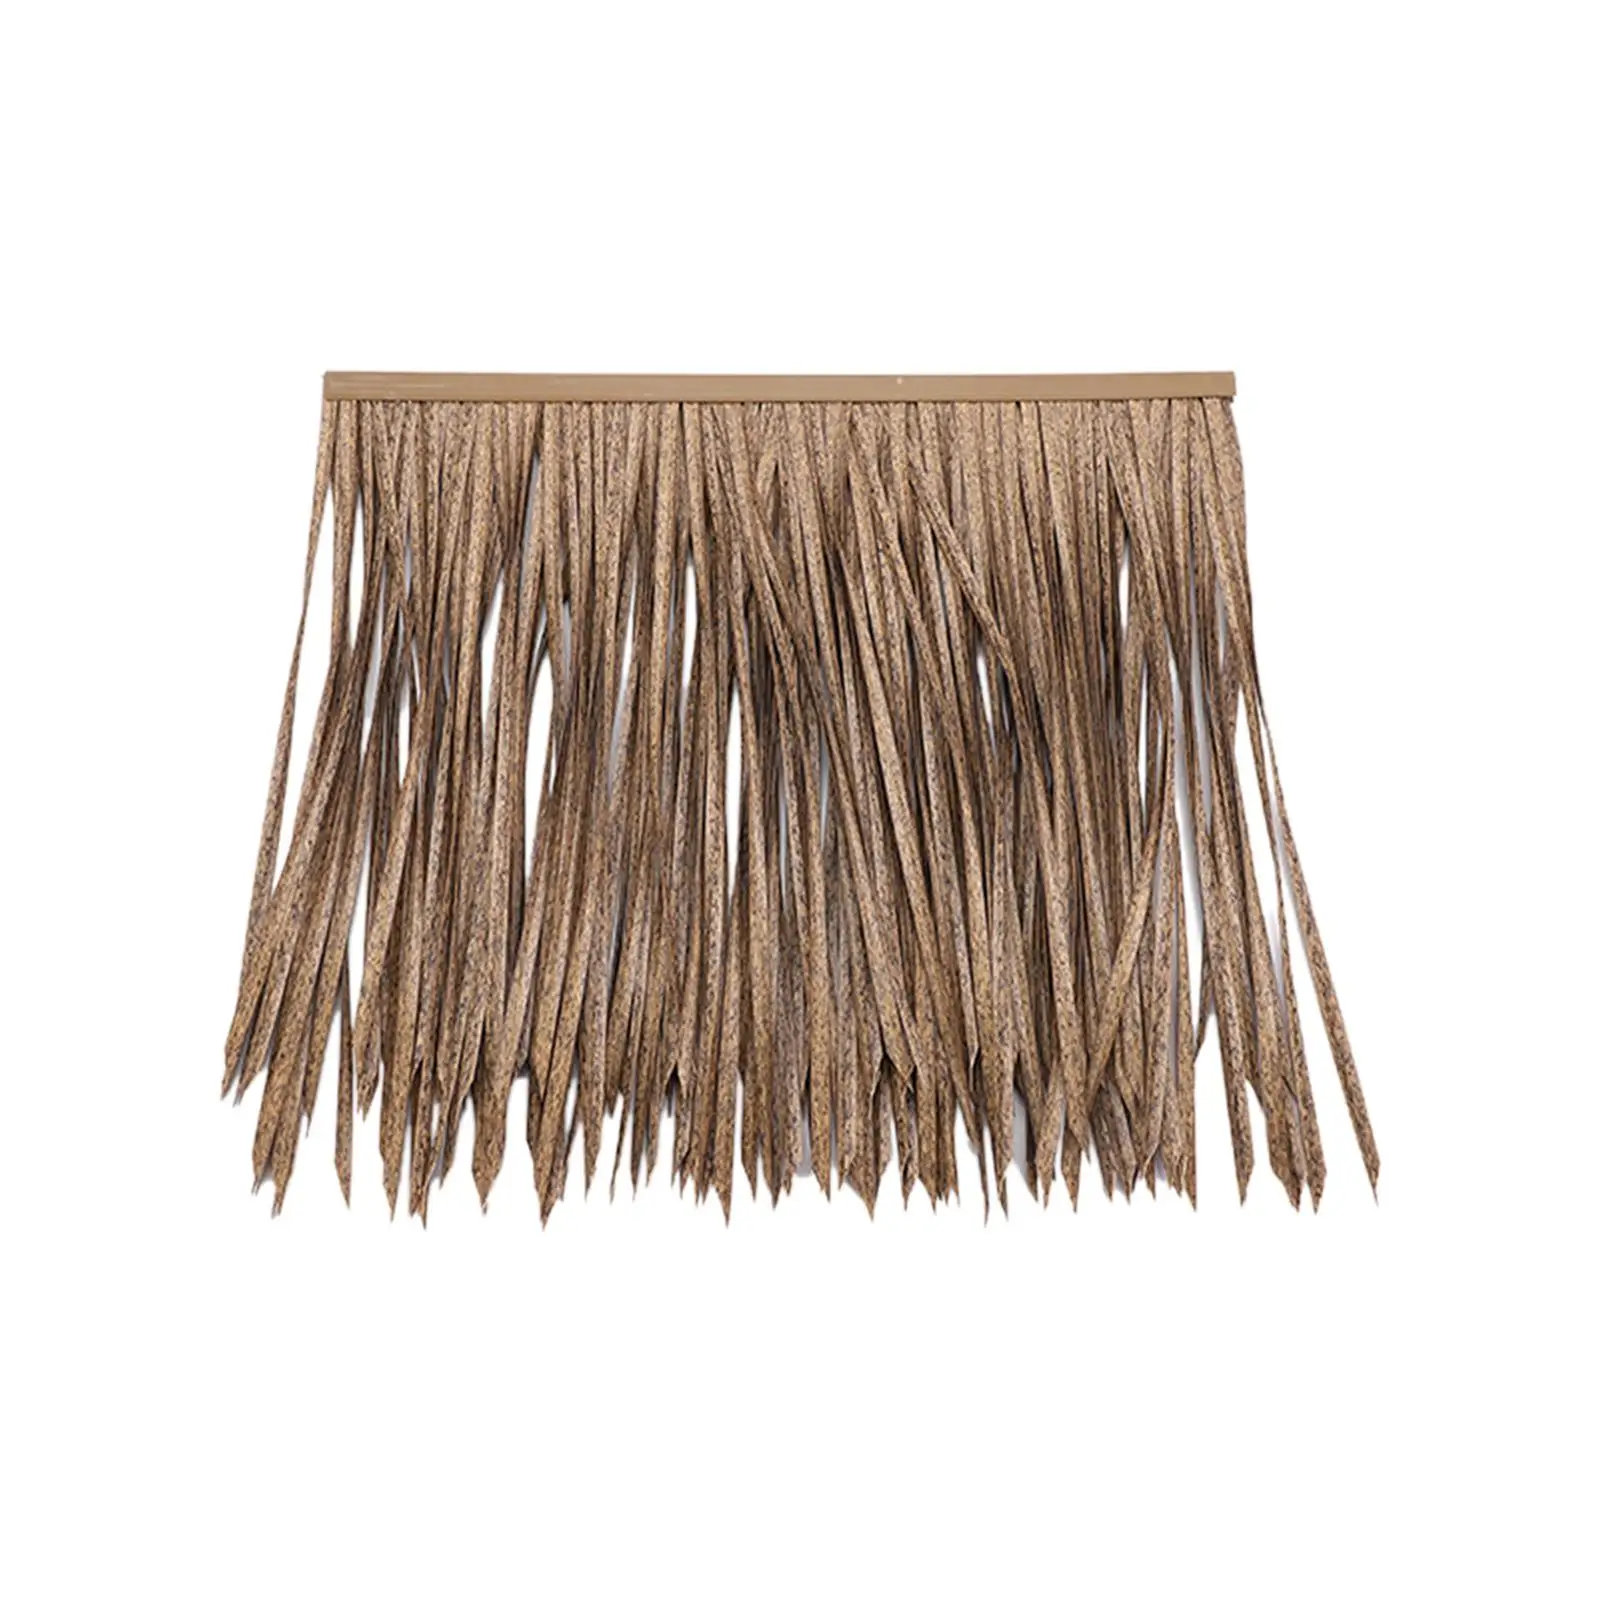 Simulated Thatch Roof DIY Multipurpose Decoration 19.69``x19.69`` Straw Roof Thatch for Seaside Patio Hut Villas Park Landscapes